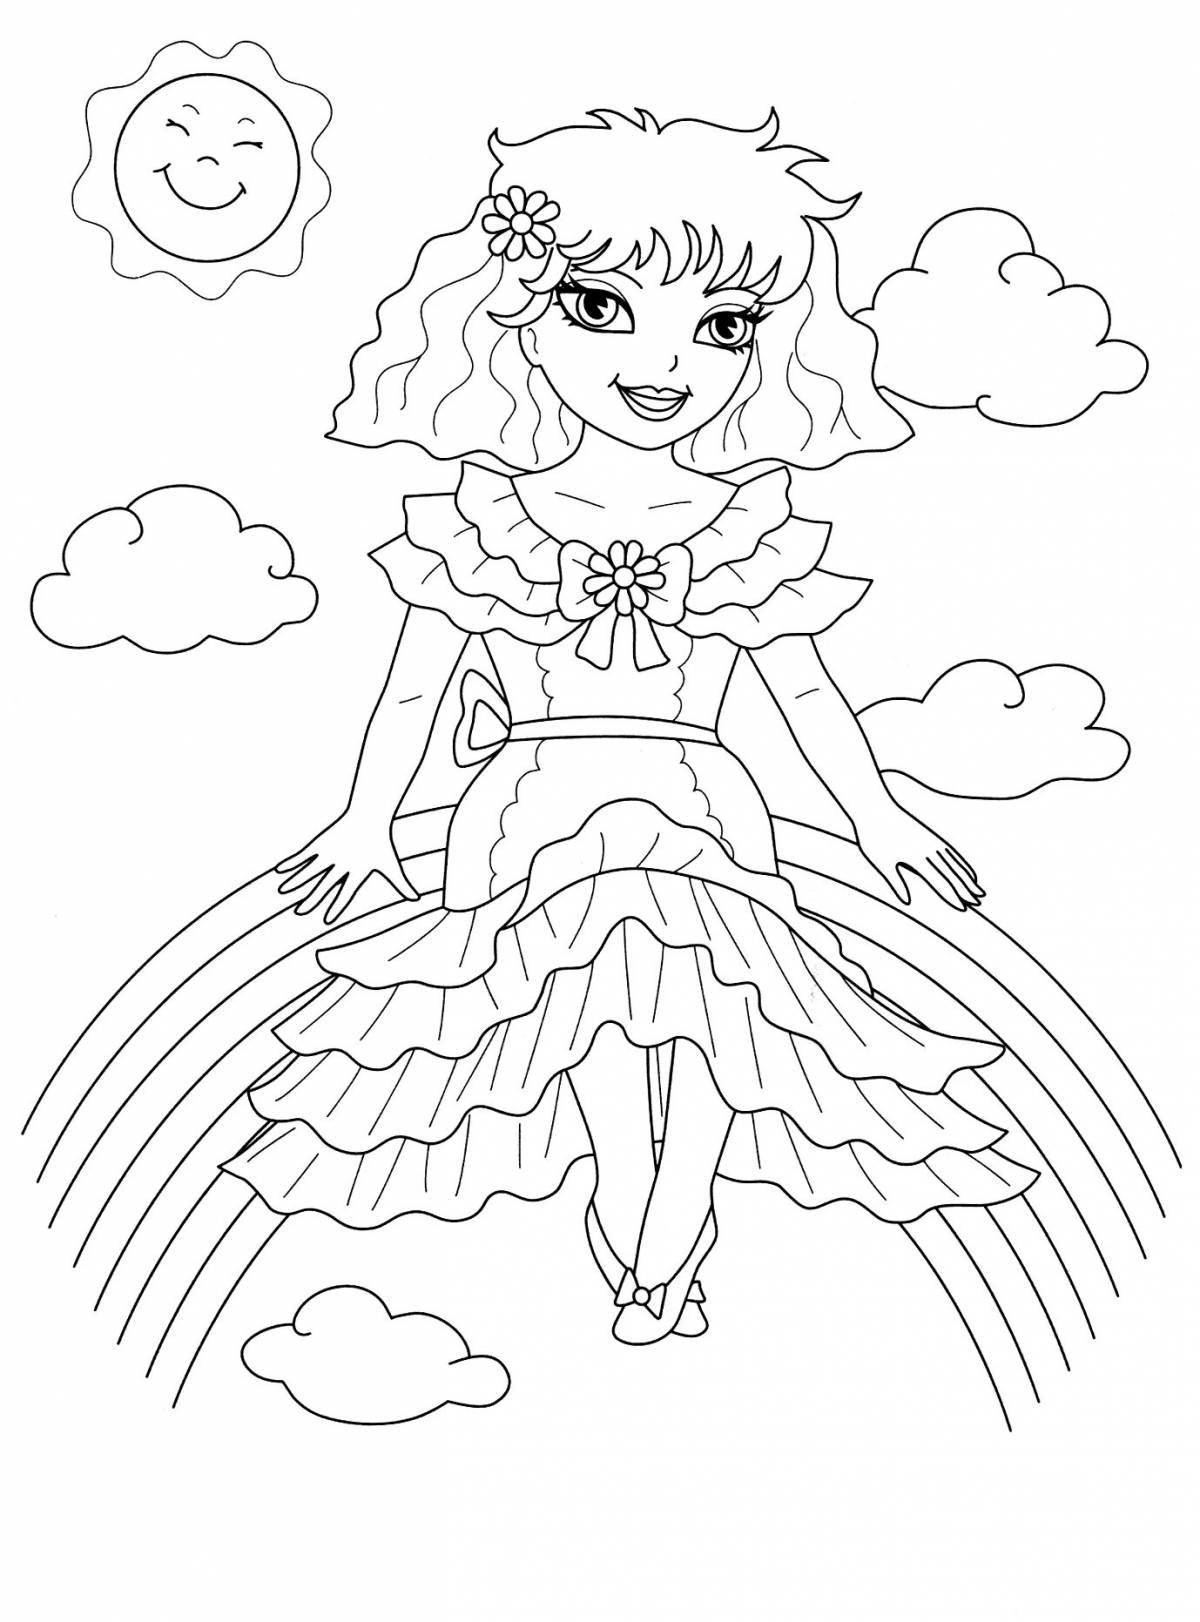 Exciting rainbow coloring book for girls